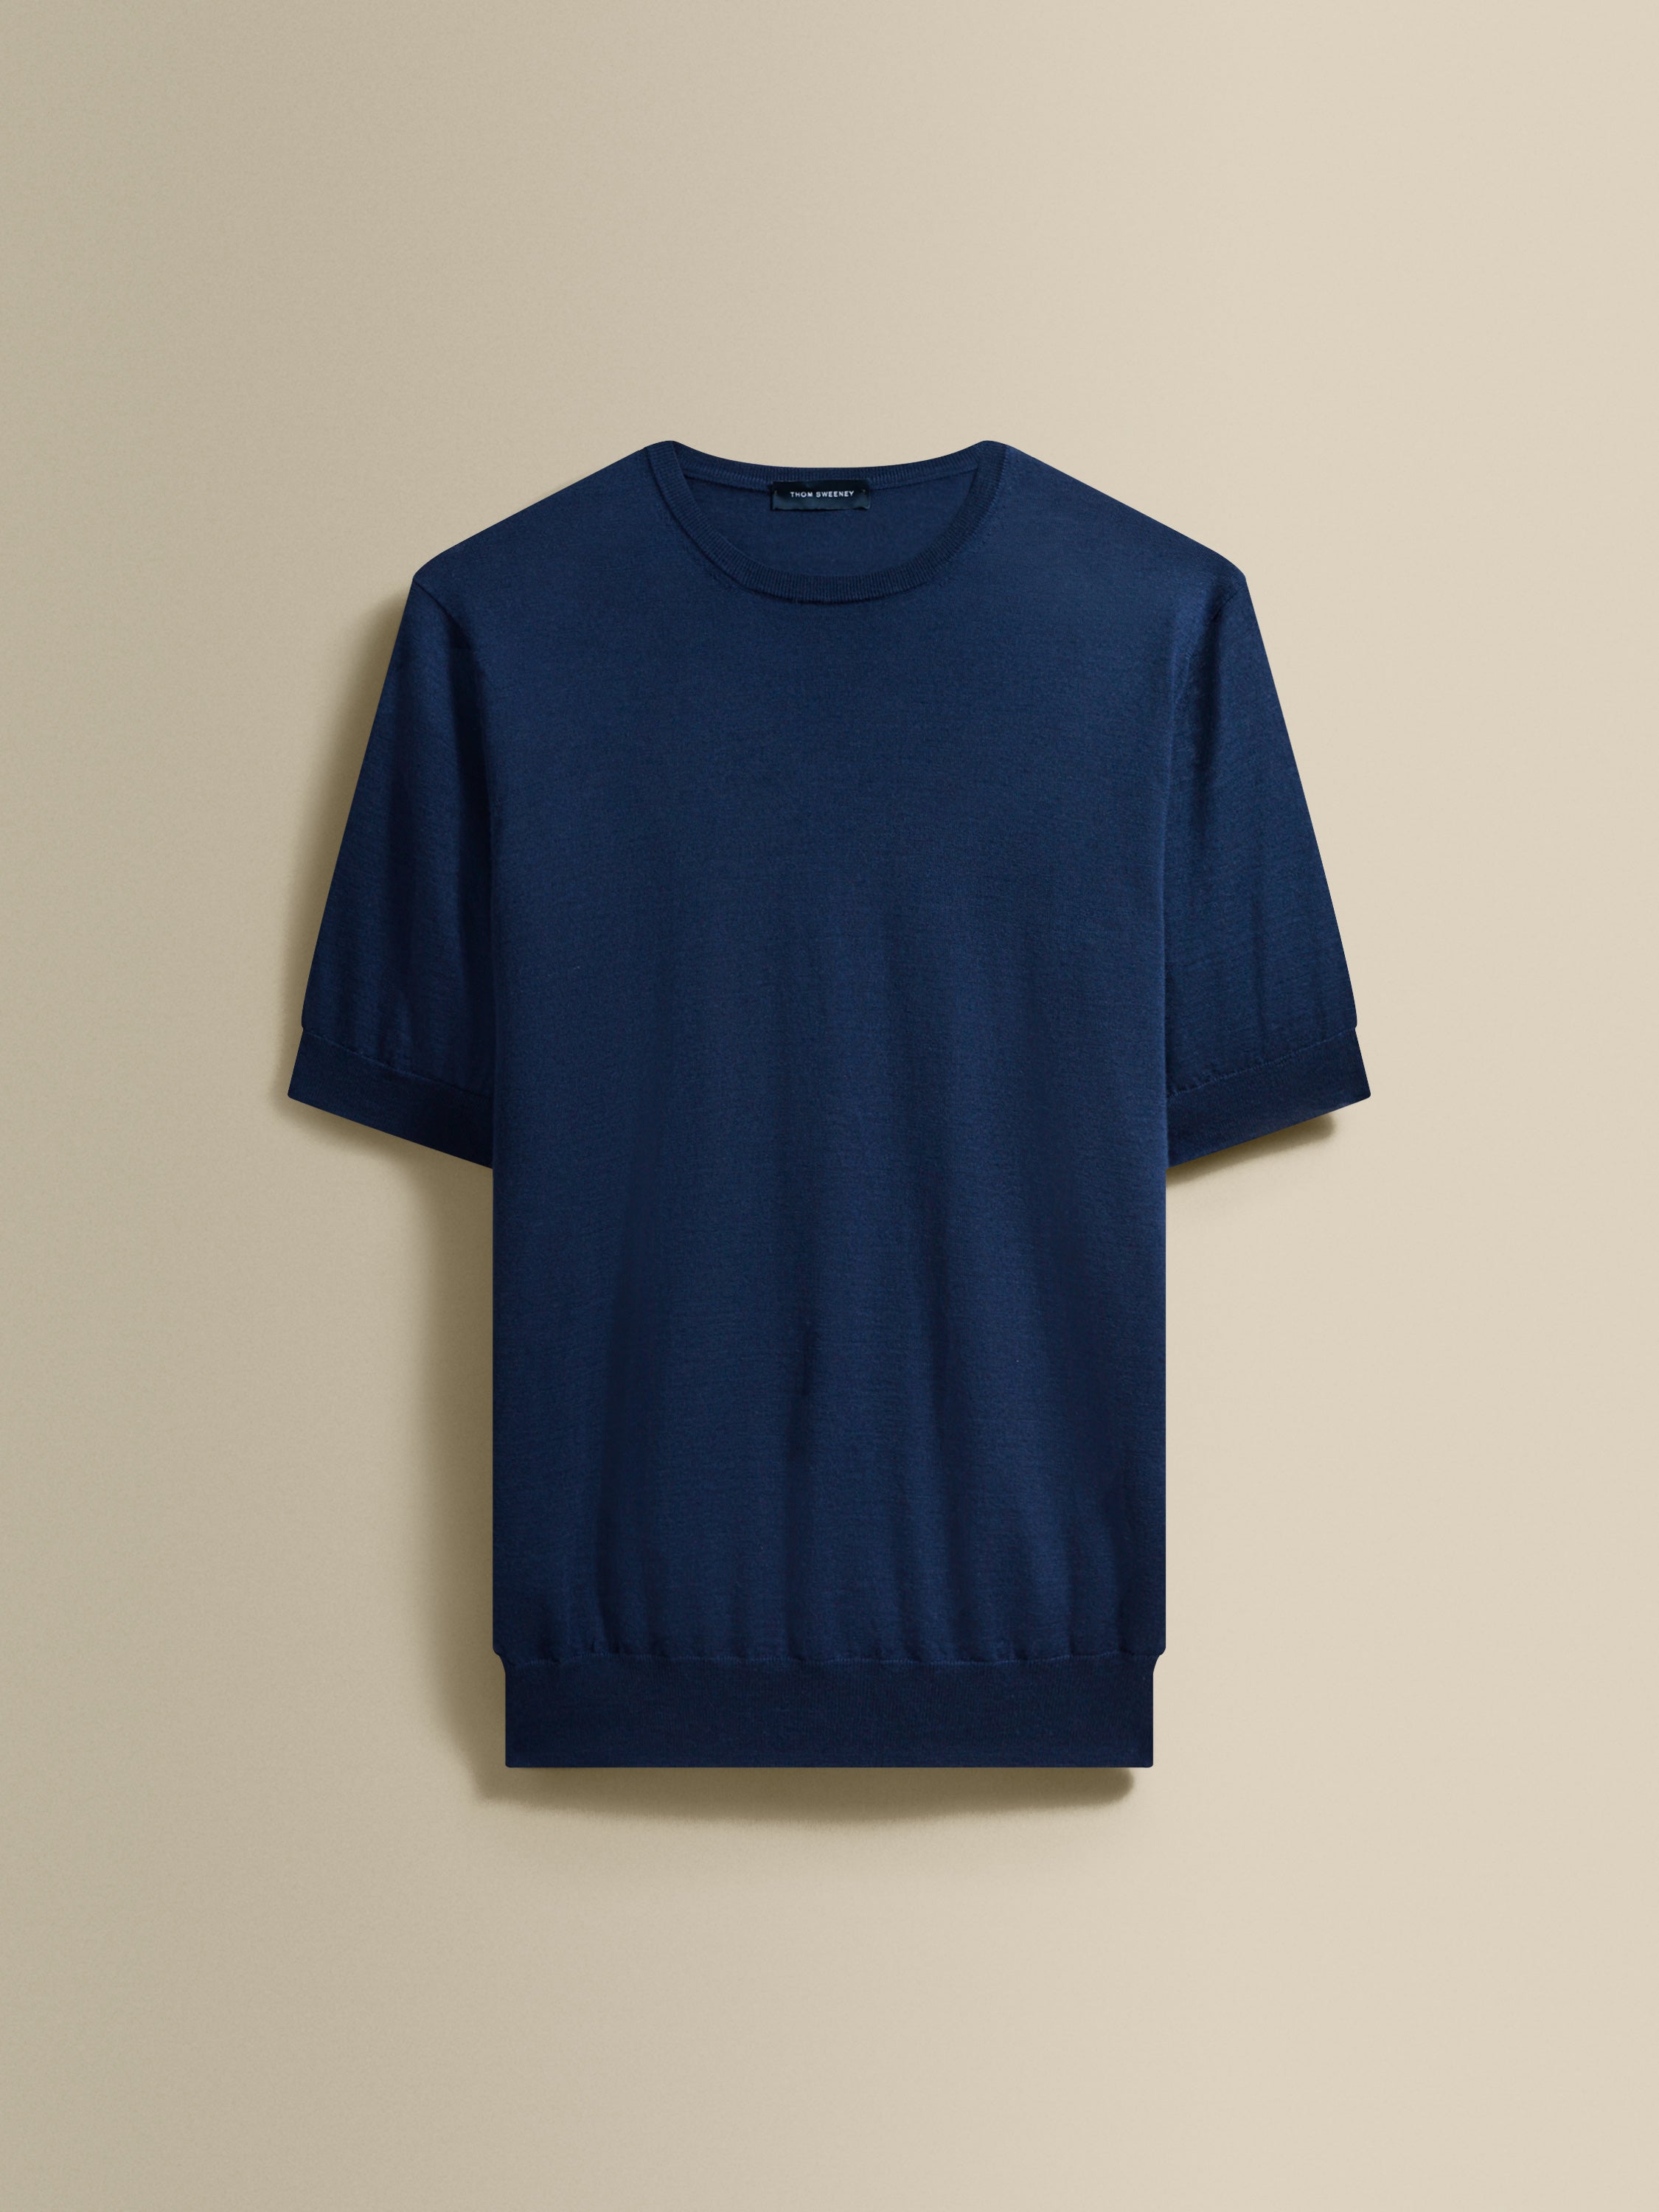 Cashmere Silk T-Shirt Navy Product Image